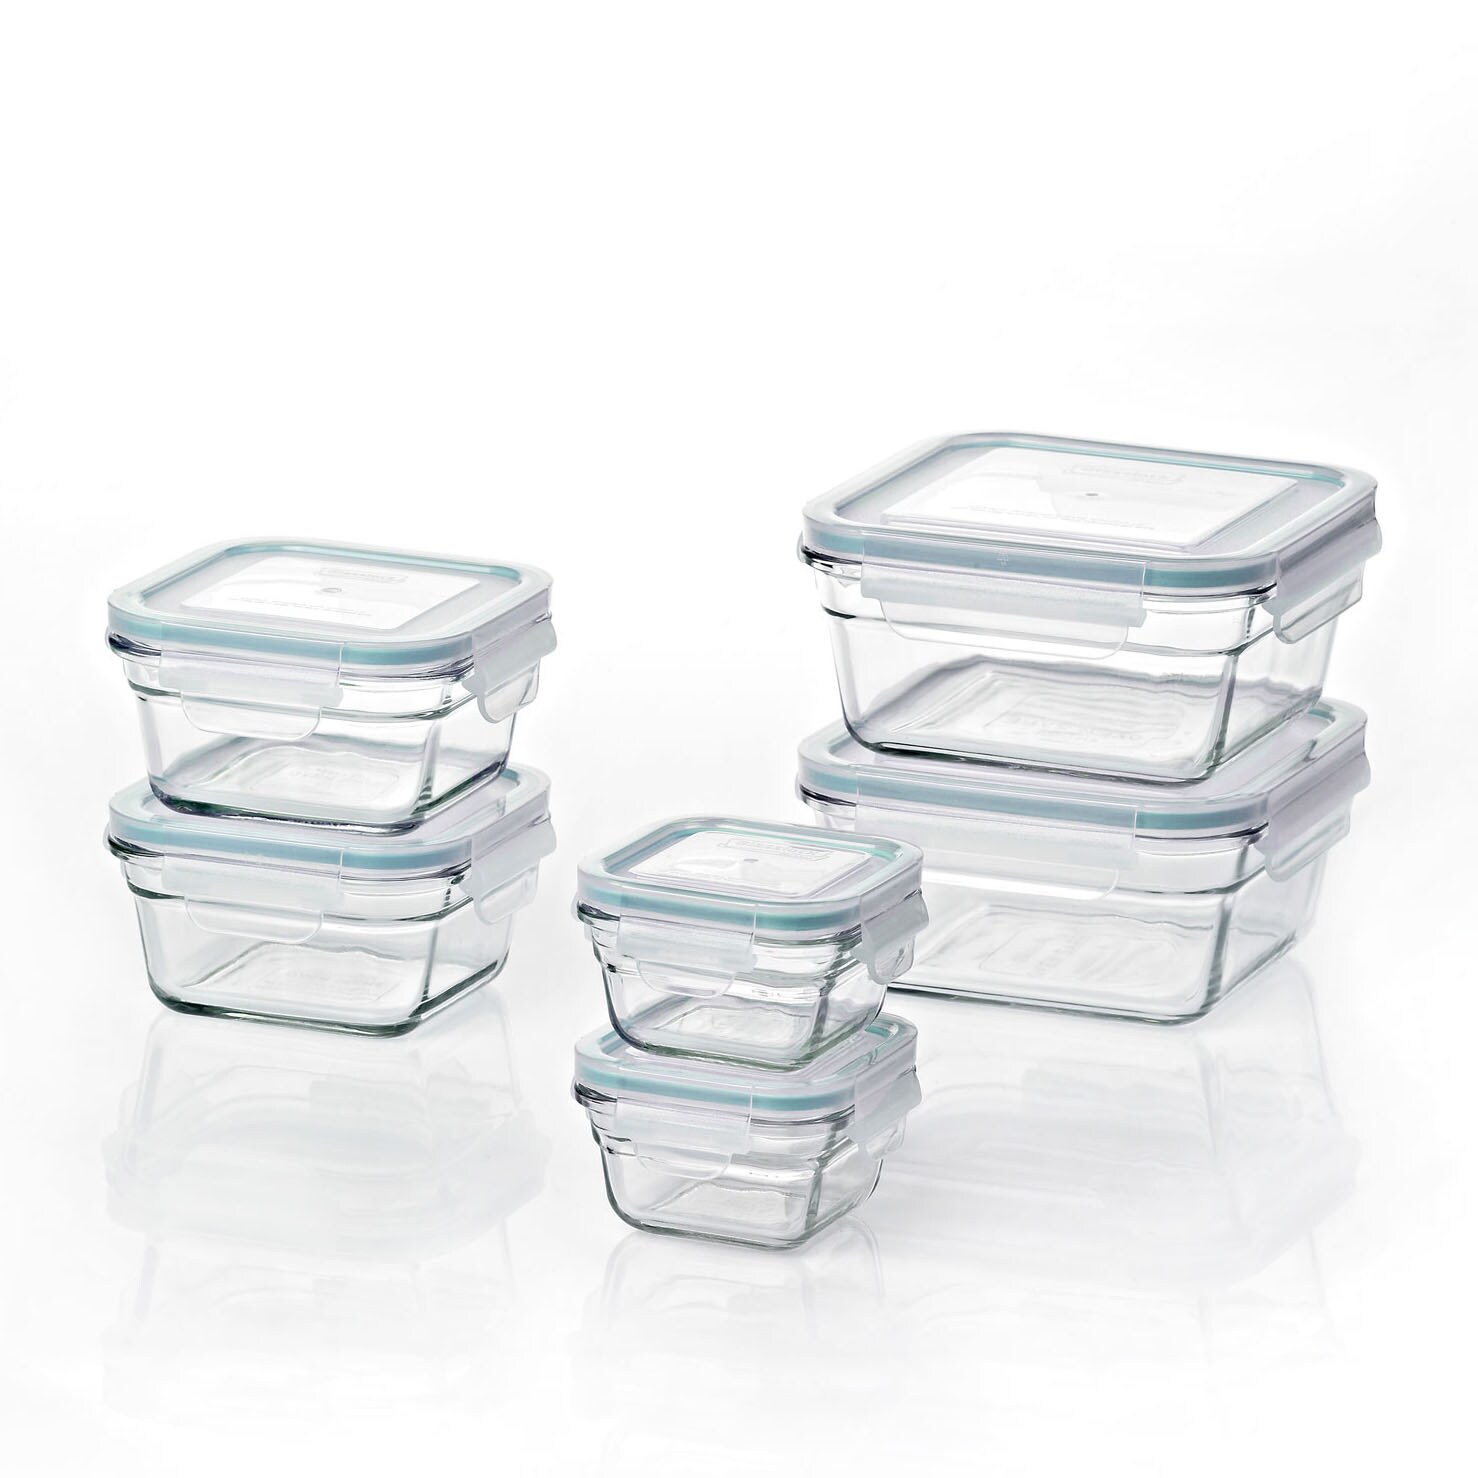 Acrylic 6-7 Pack Kitchen Airtight Food Storage Container Set BPA